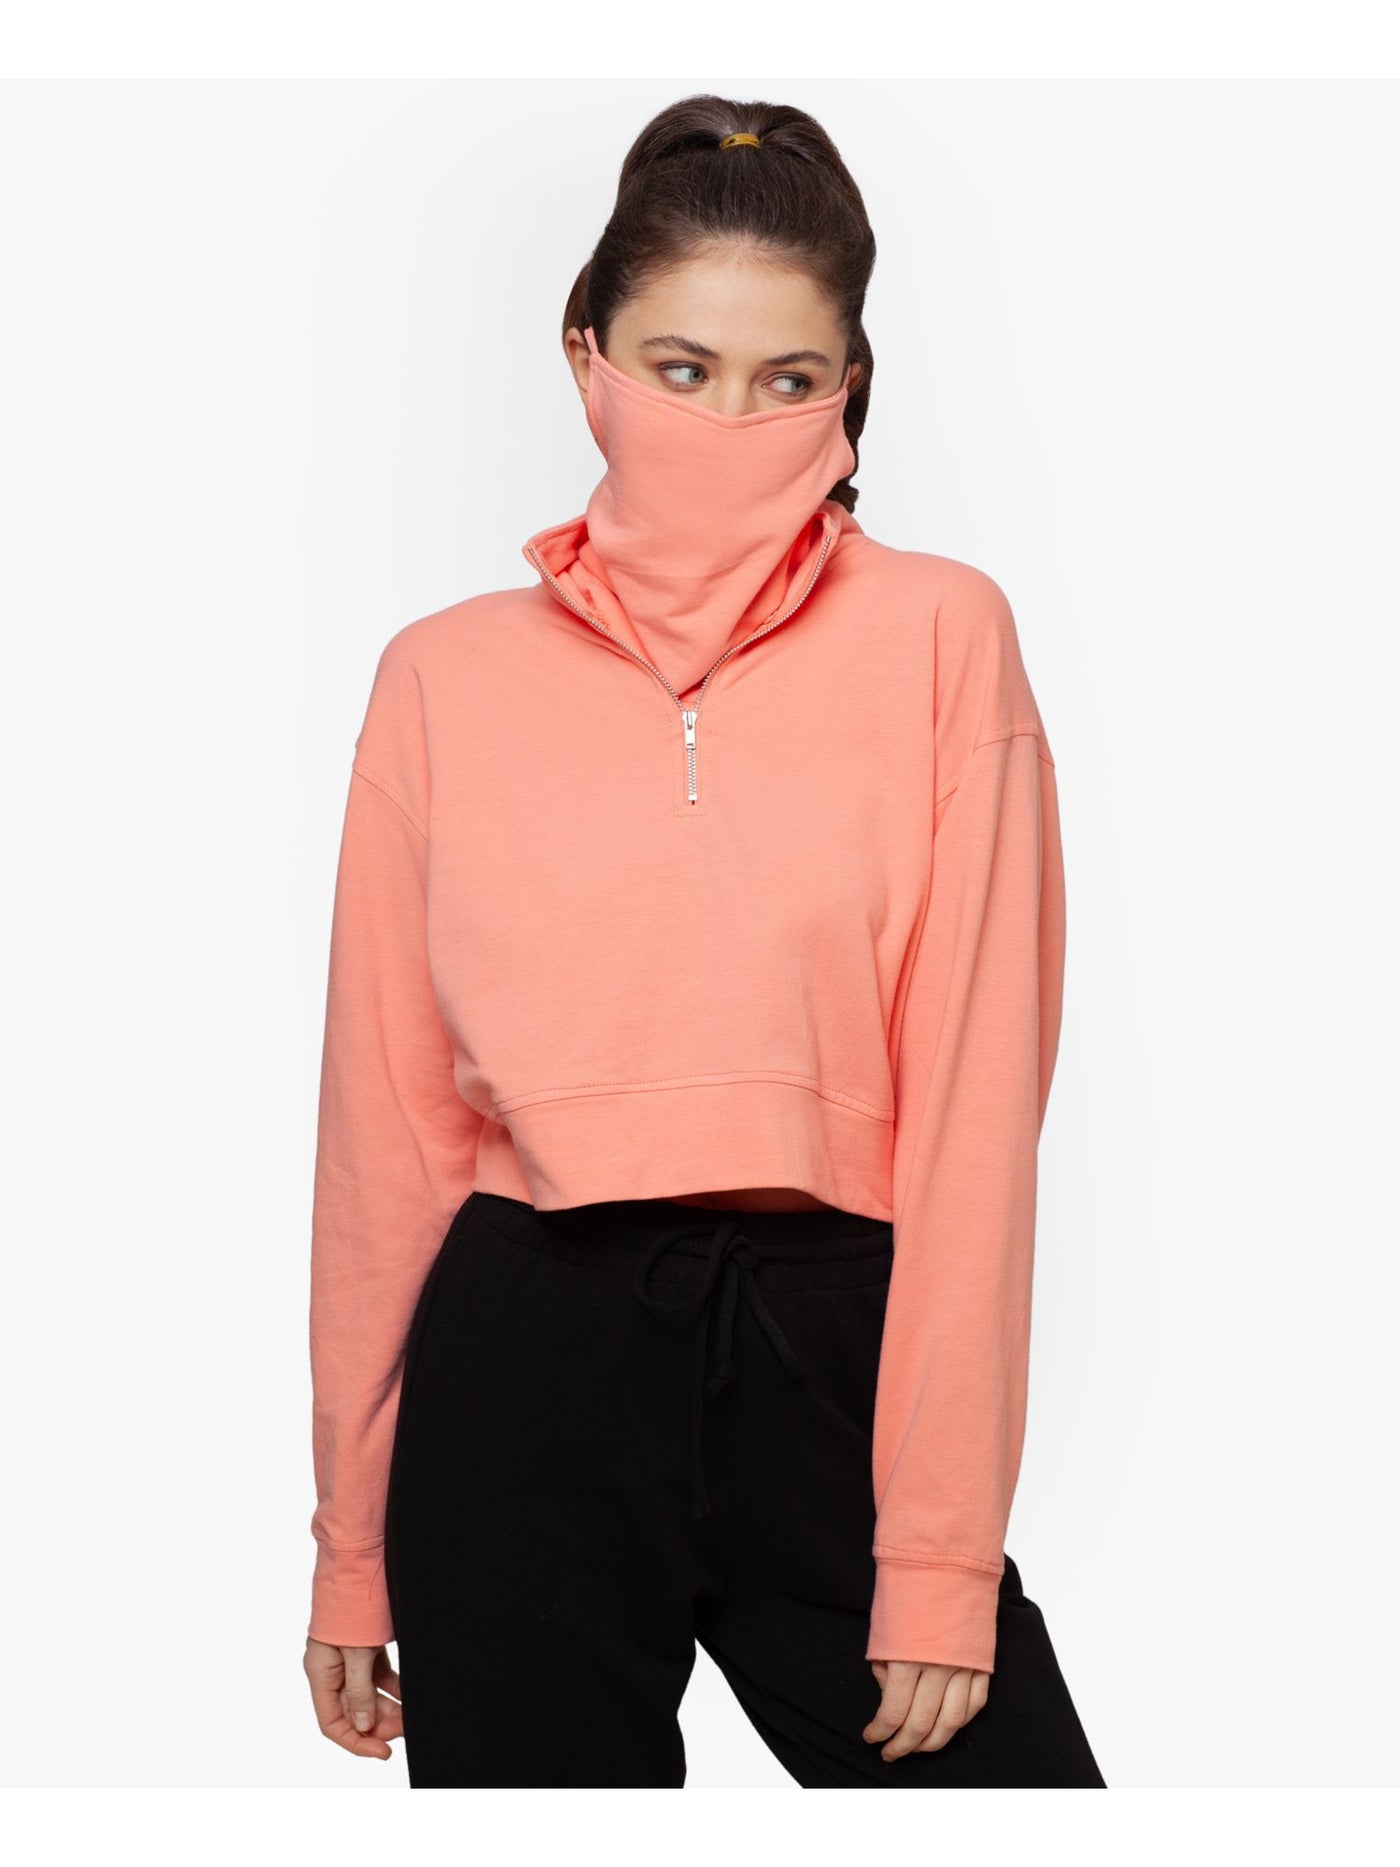 BETSY & ADAM Womens Orange Zip Pullover Attached Mask Long Sleeve Top L